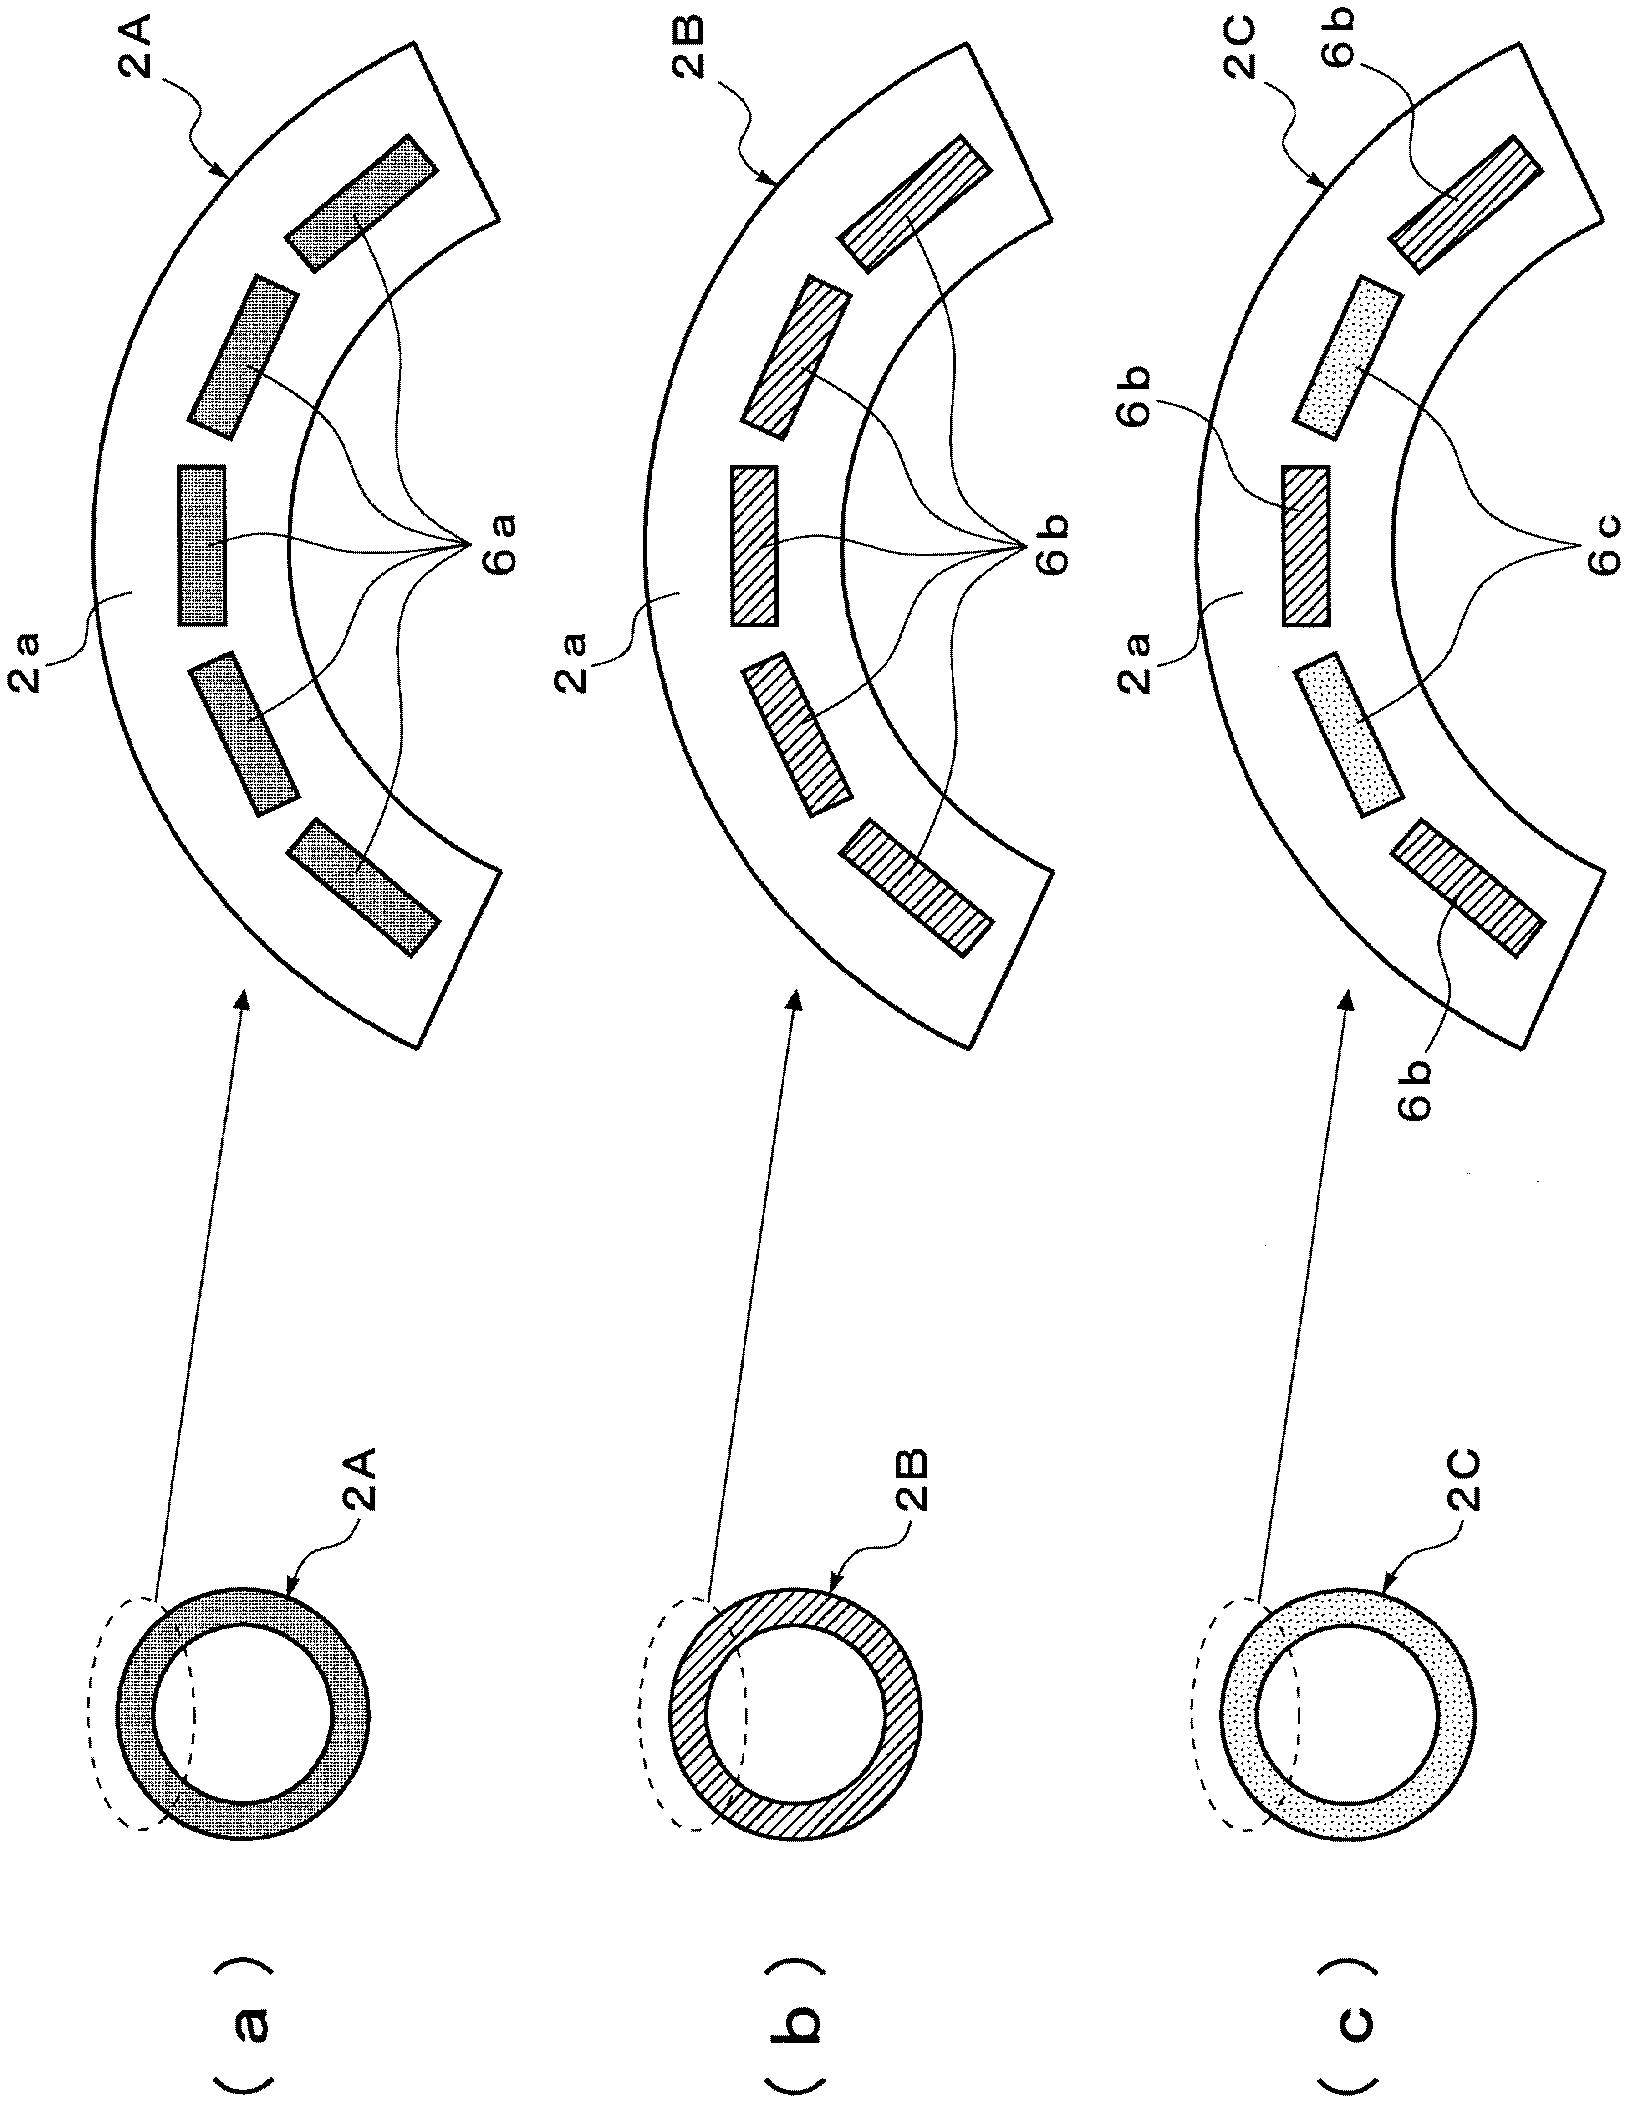 Method for recycling motor